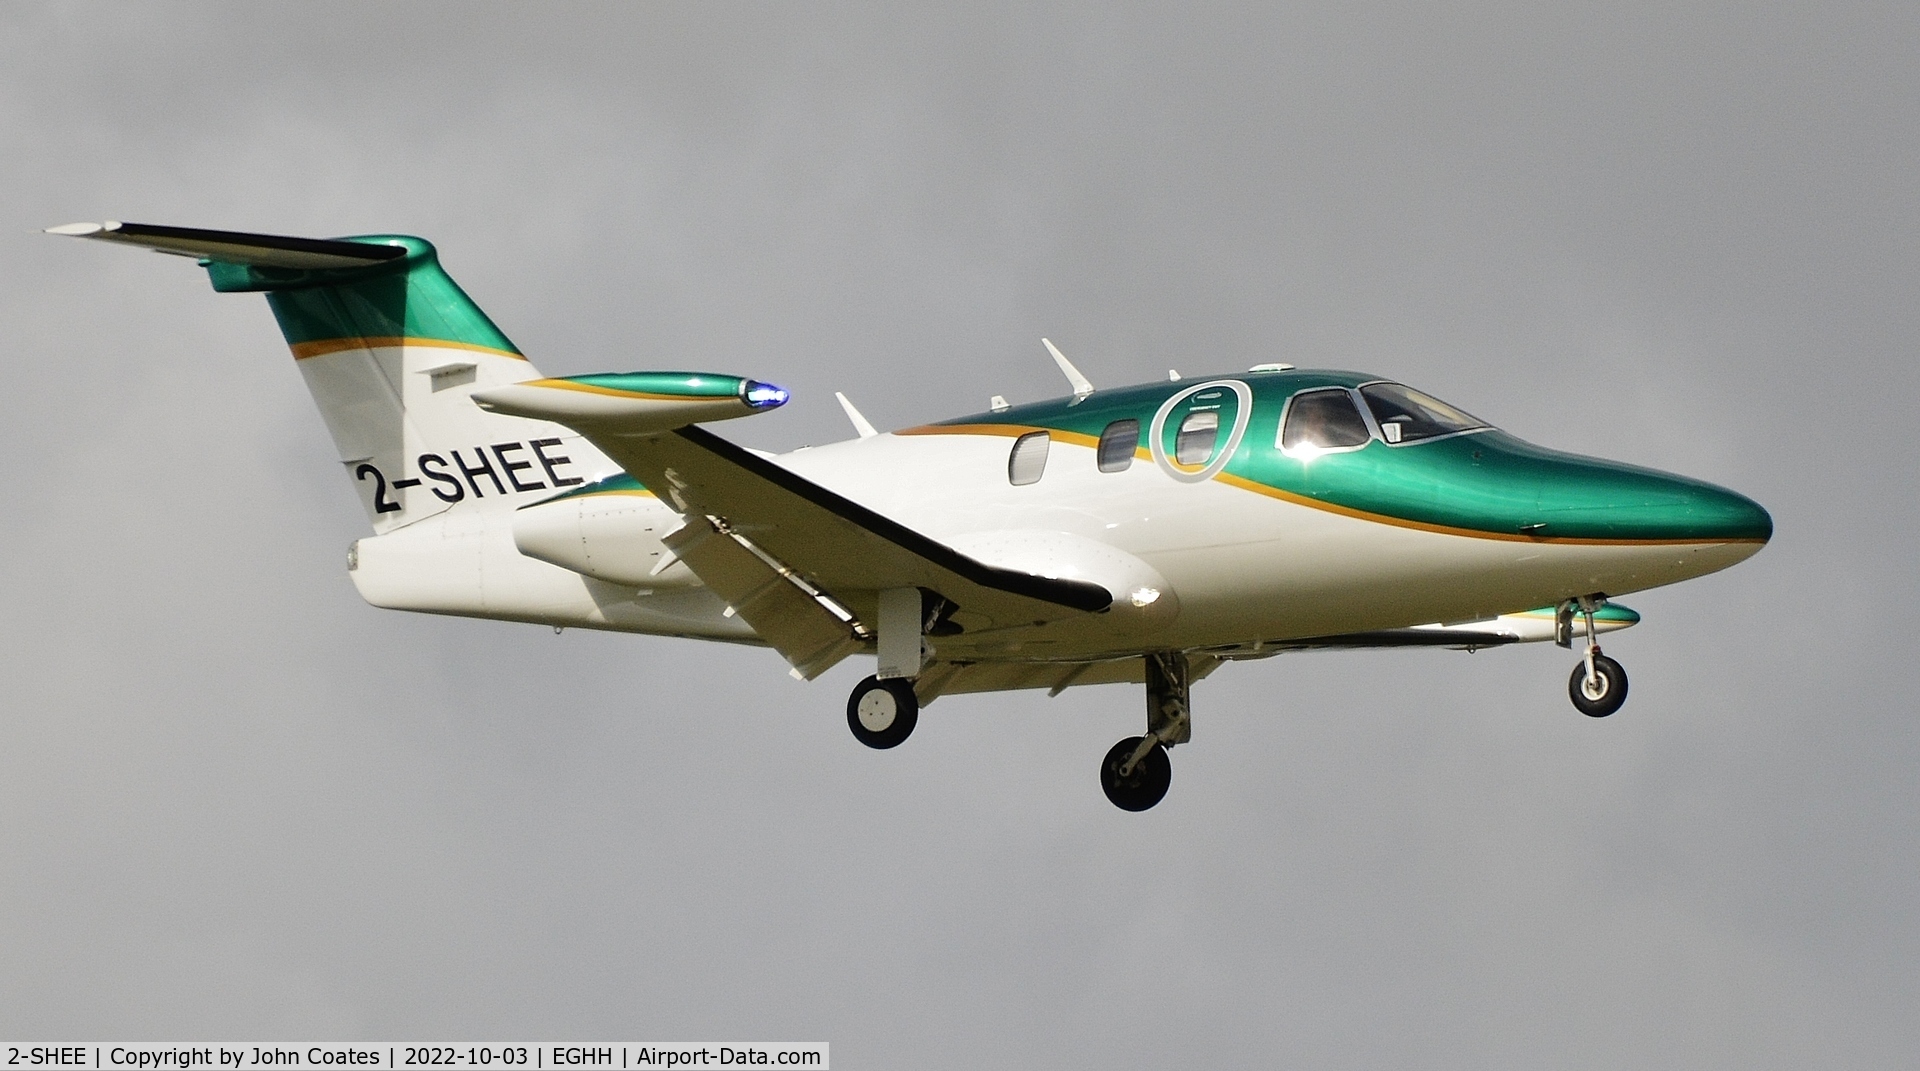 2-SHEE, 2007 Eclipse Aviation Corp EA500 C/N 000020, Approach to 08